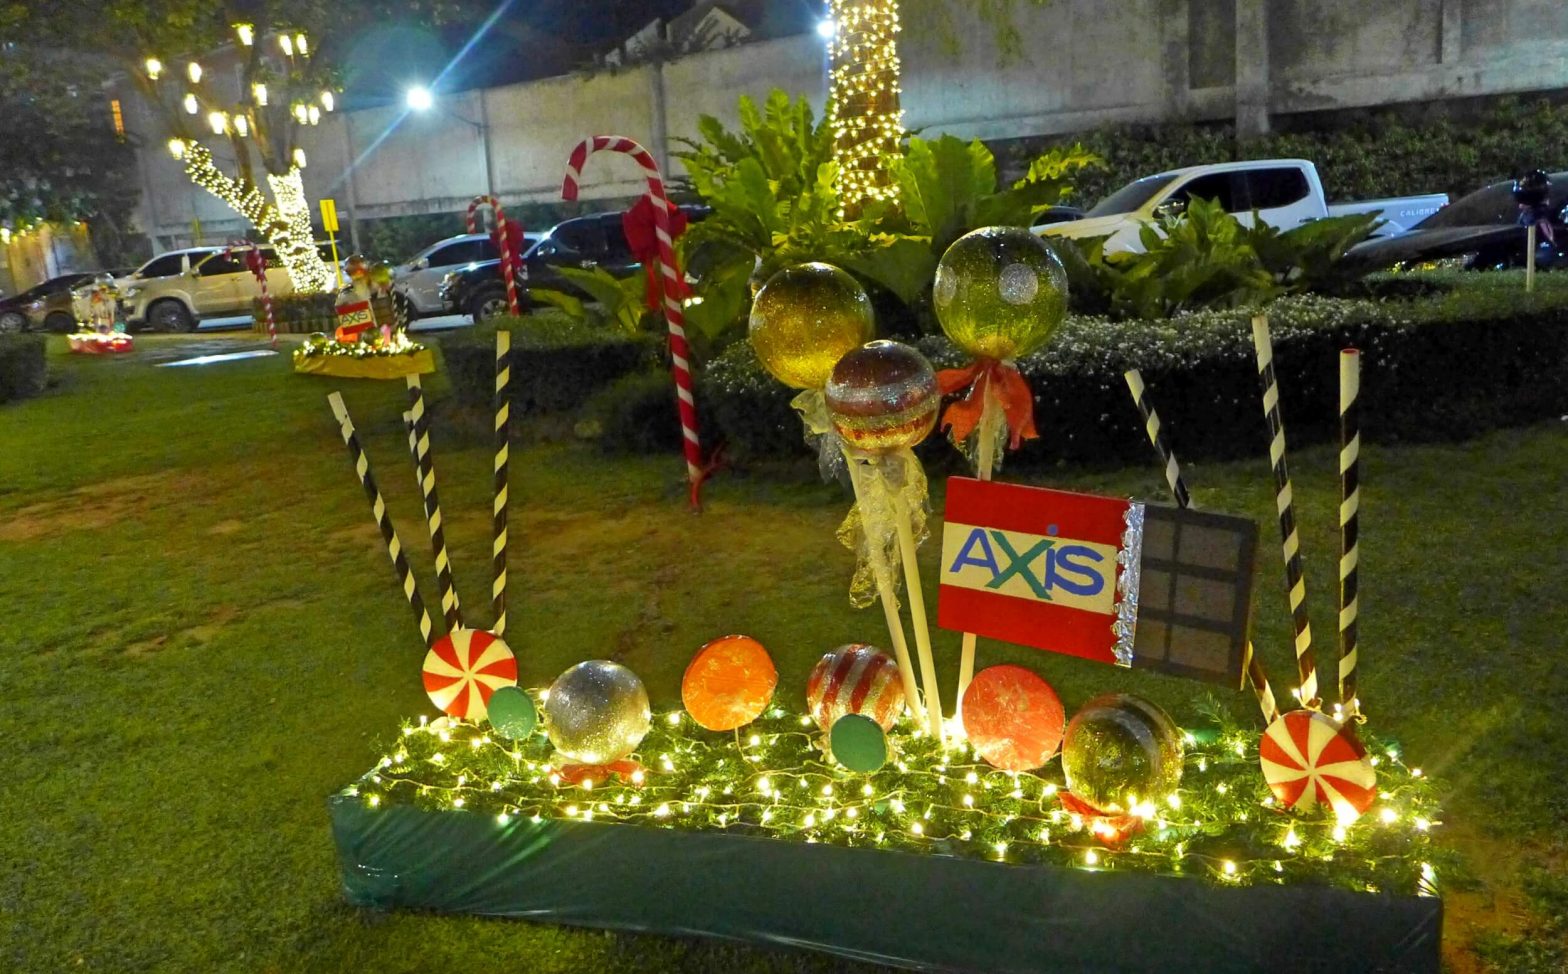 Axis Entertainment Avenue lines up fun activities for holiday season